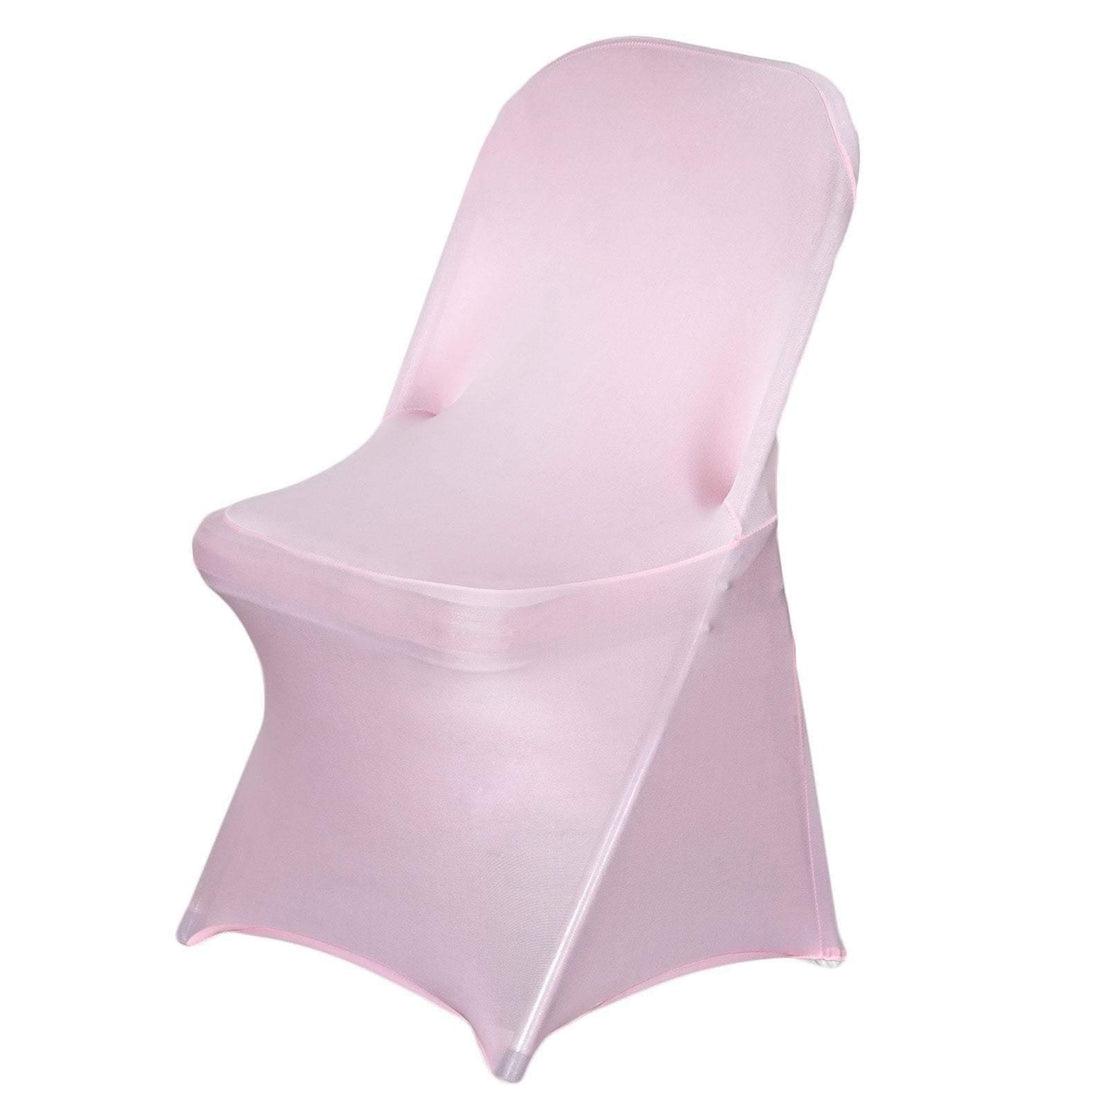 Stretch Spandex Folding Chair Cover Pink - Your Chair Covers Inc.